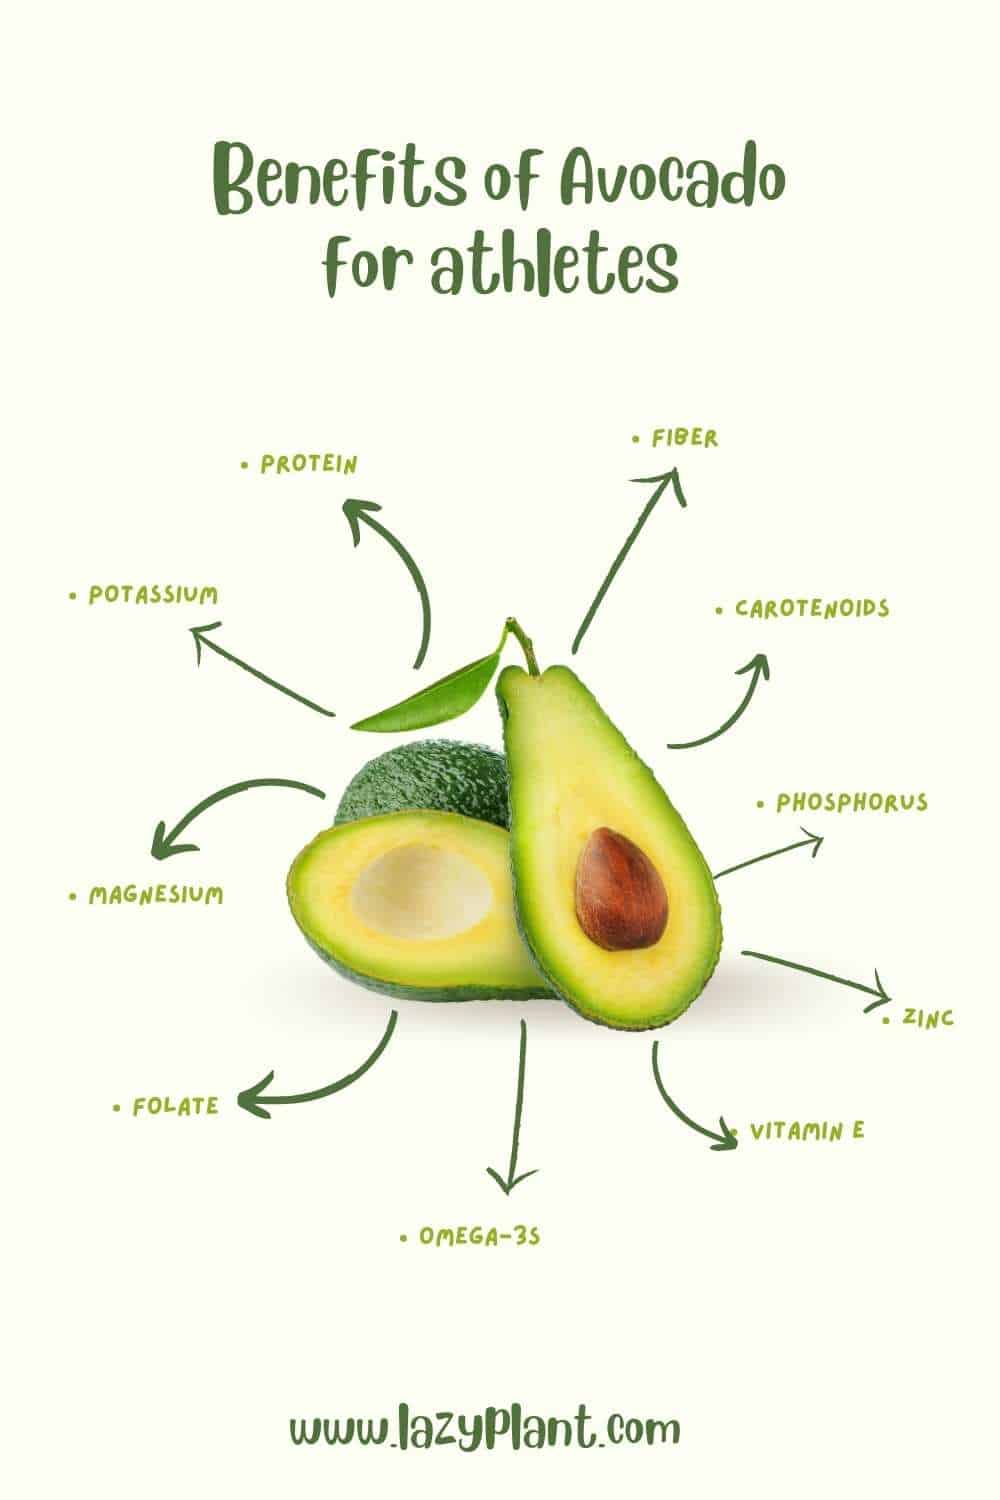 Eating avocado after a workout supports muscle growth, recovery, and athletic performance!